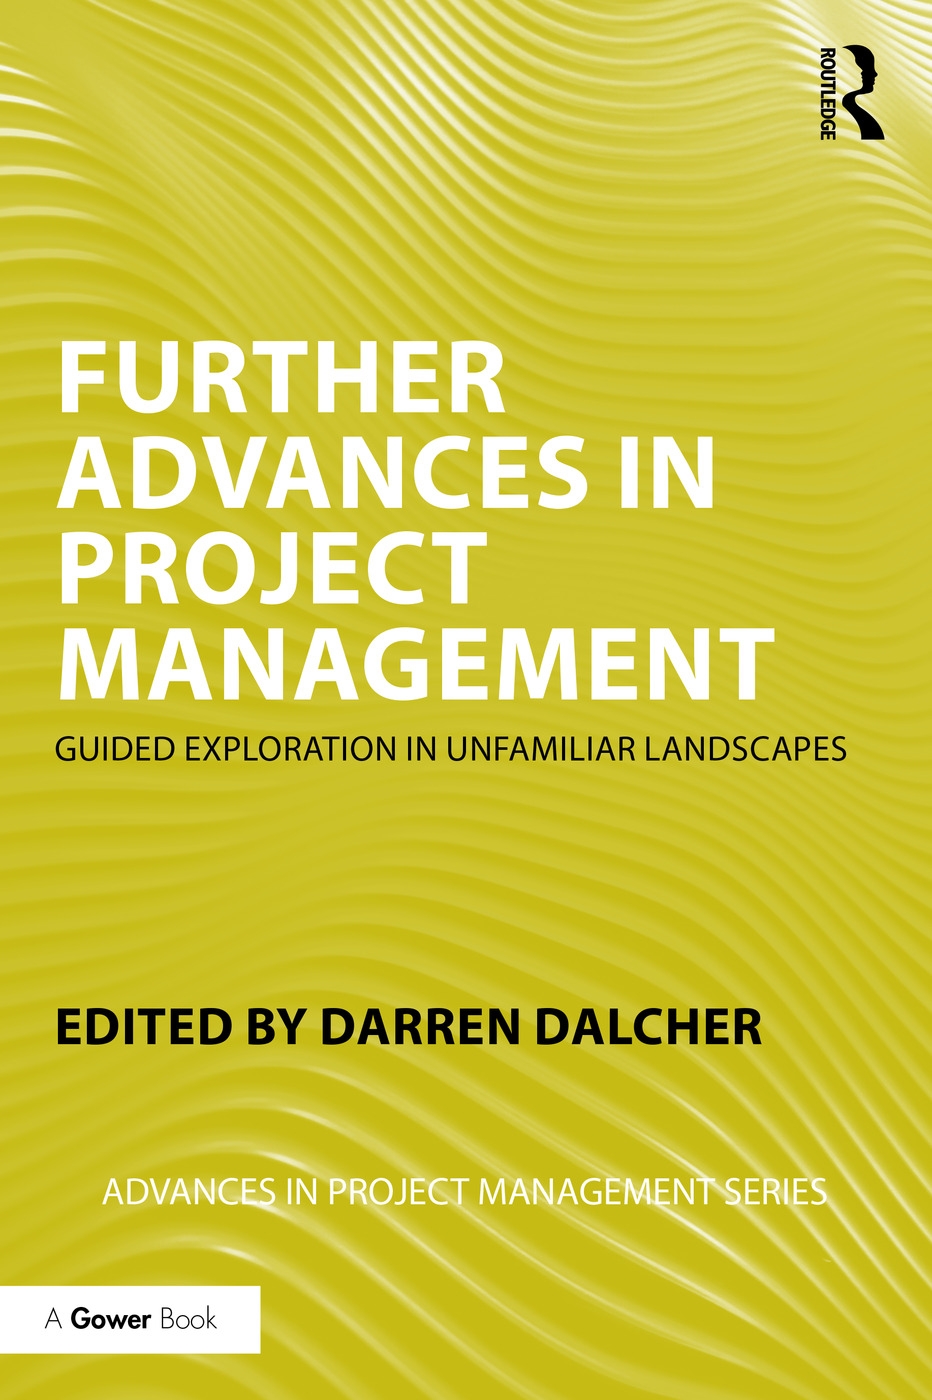 Further Advances in Project Management: Guided Exploration in Unfamiliar Landscapes